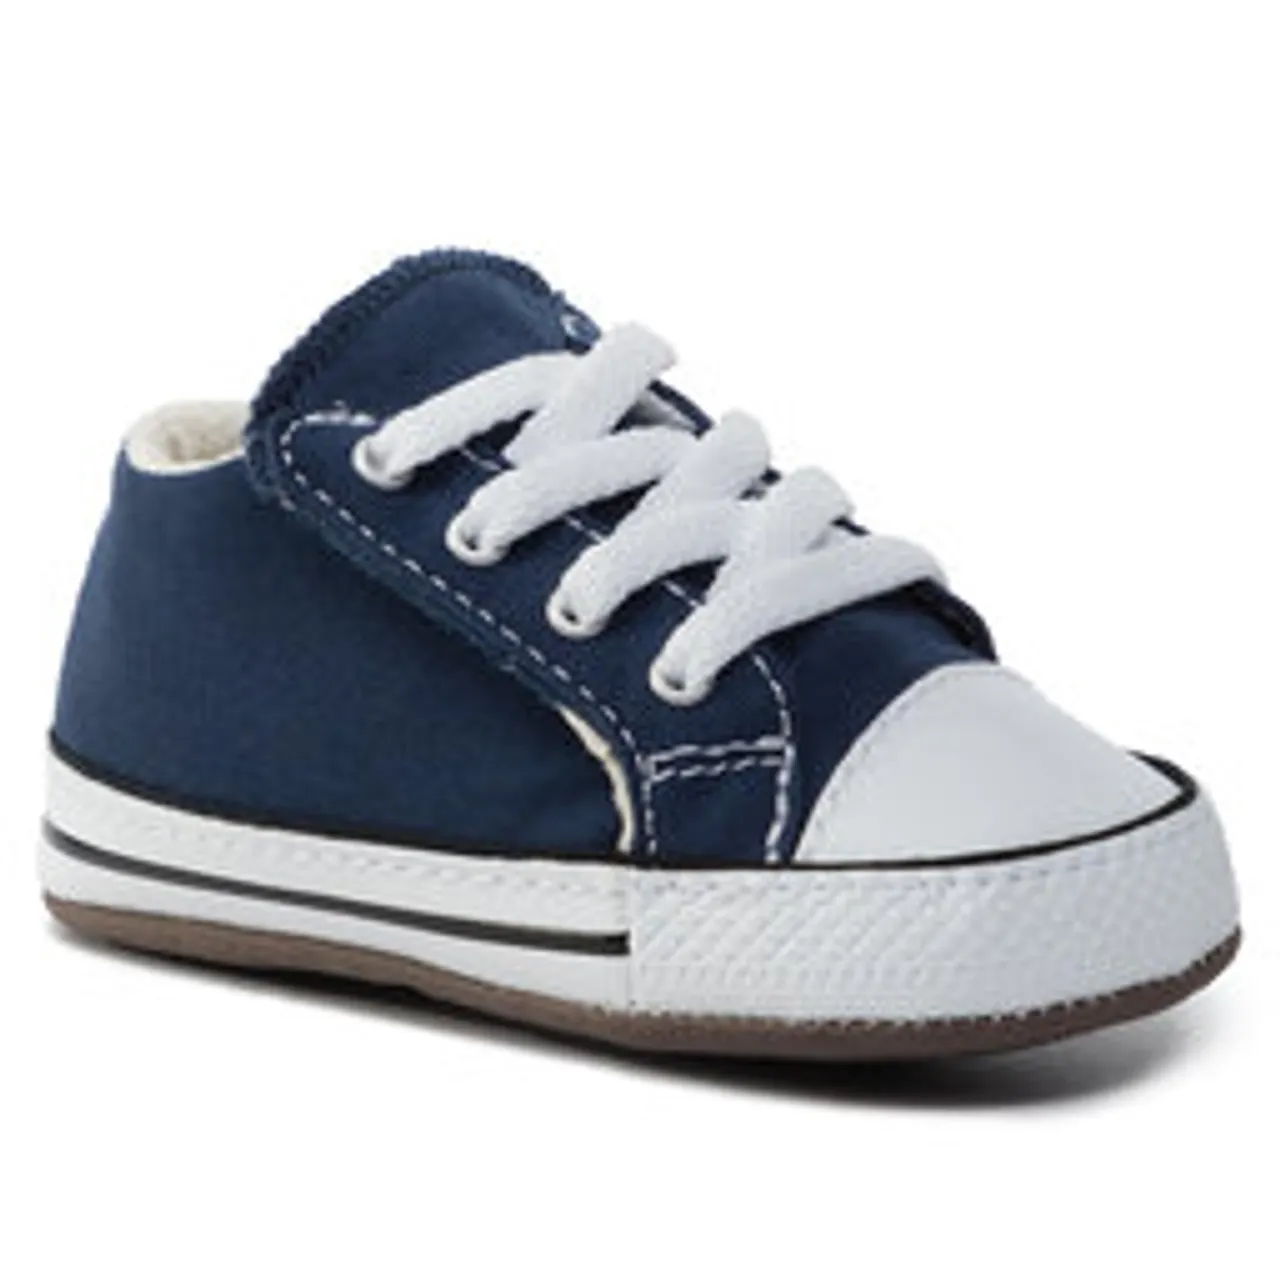 Sneakers aus Stoff Converse Ctas Cribster Mid 865158C Navy/Natural Ivory/White